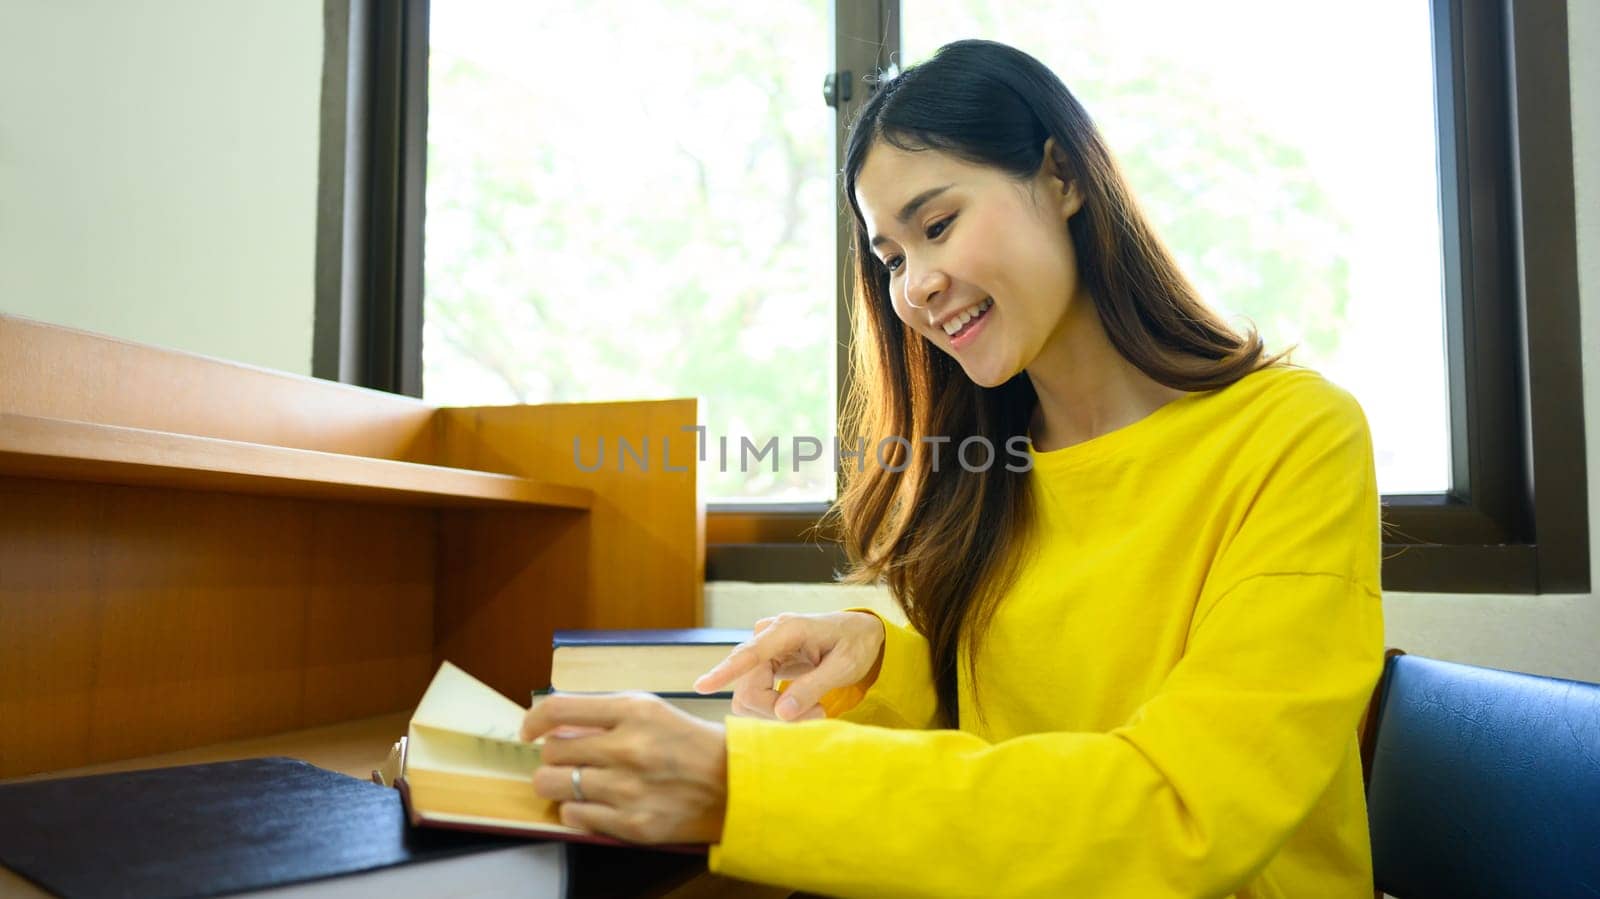 Peaceful woman reading interesting book, preparing for exam in library. People, knowledge and education concept.